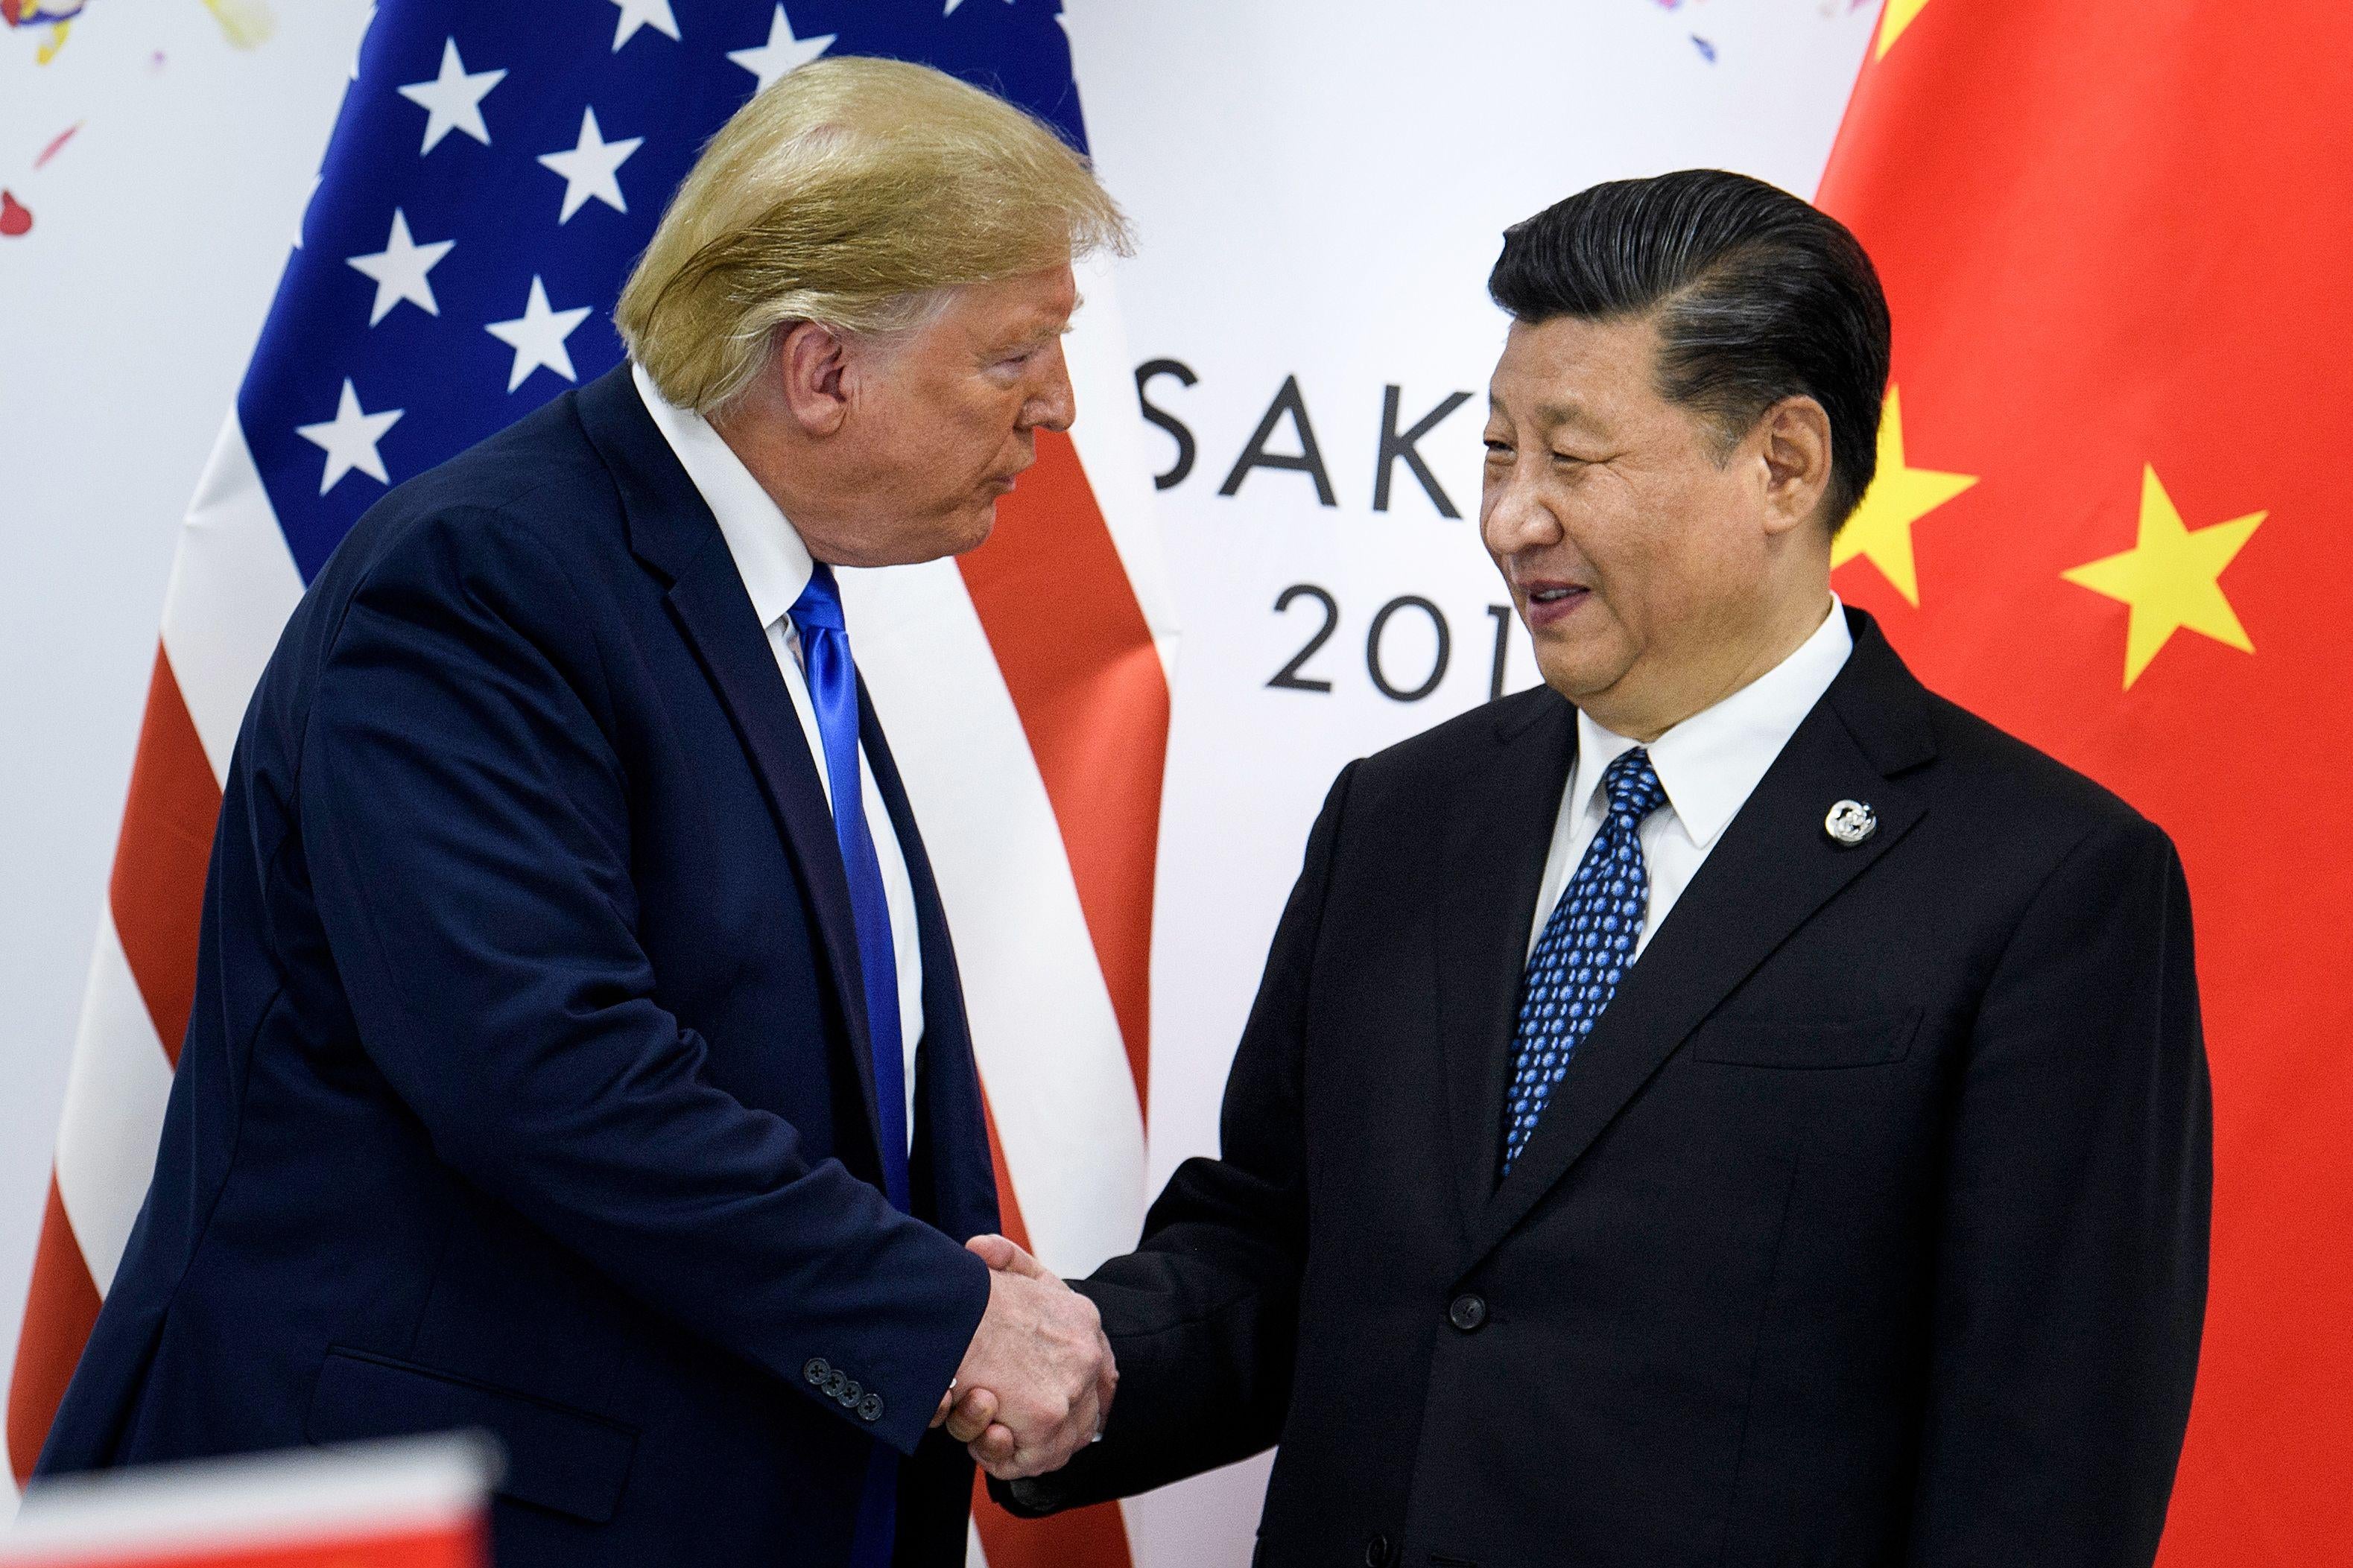 Donald Trump shakes hands with Xi Jinping in front of American and Chinese flags.